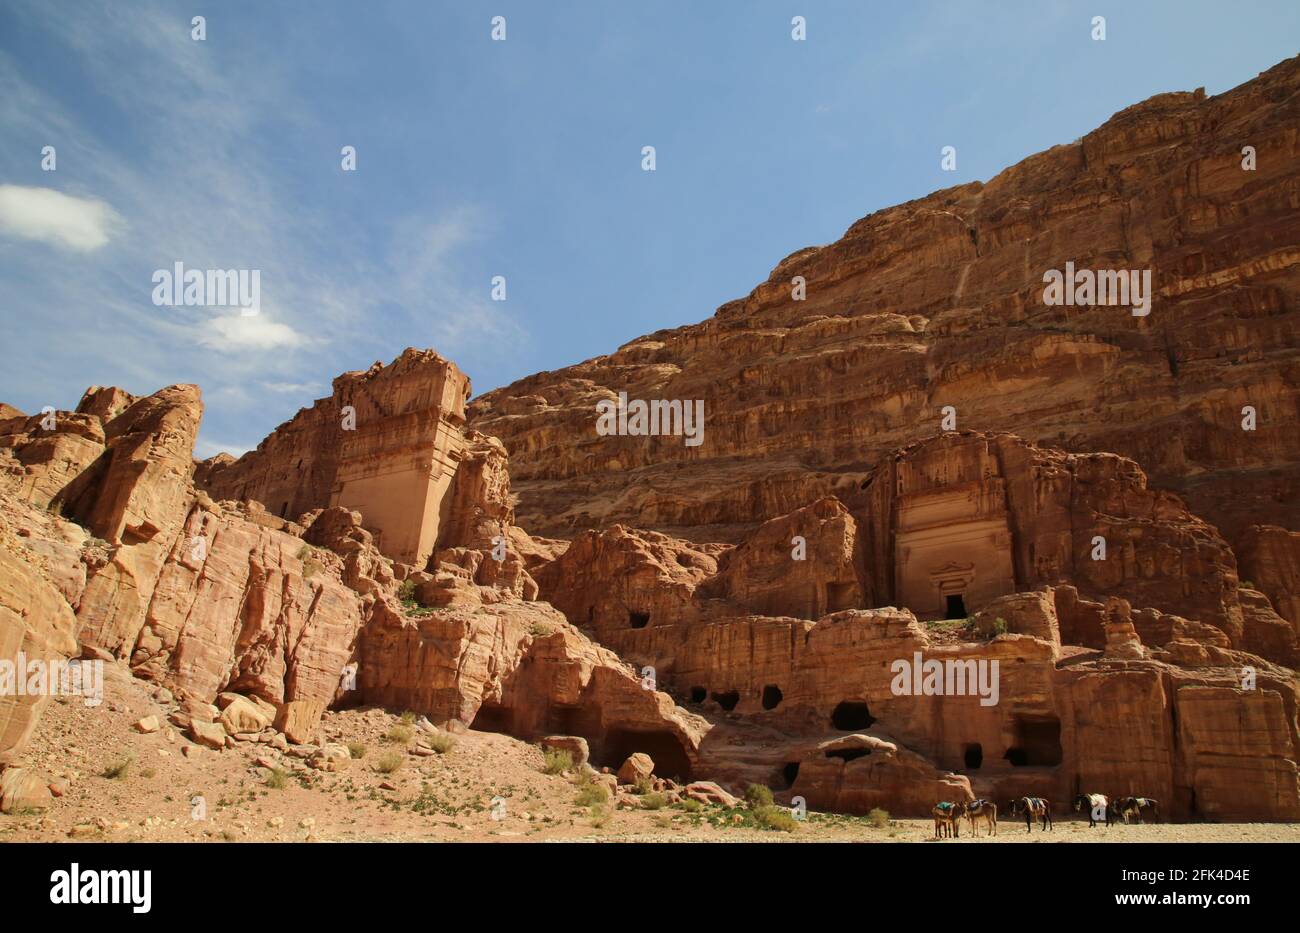 Unayshu tomb in the archaeological site of Petra Stock Photo